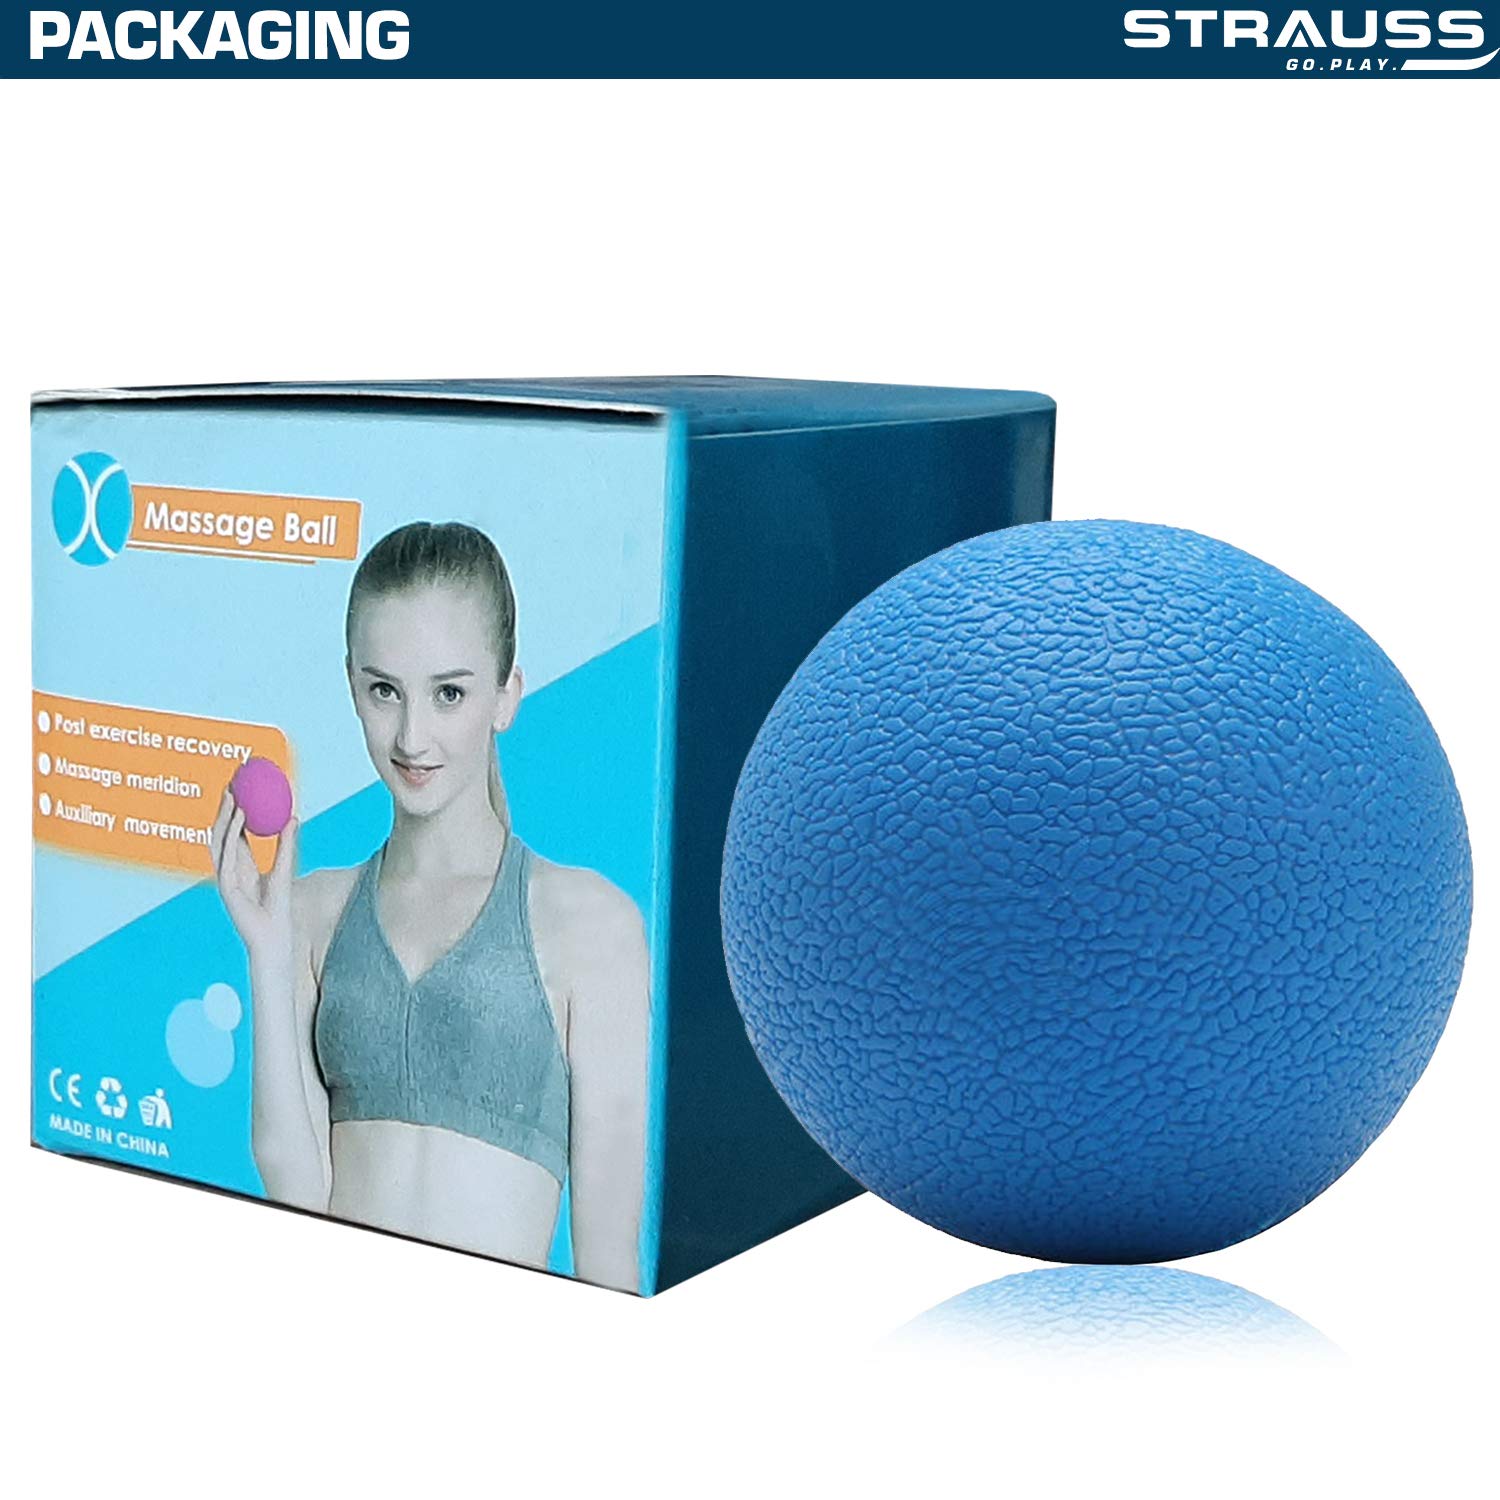 Strauss Yoga Massage Ball | Deep Tissue Massage, Trigger Point Therapy, Muscle Knots | High-Density Roller & Acupressure Ball for Pain Relief, (Blue)